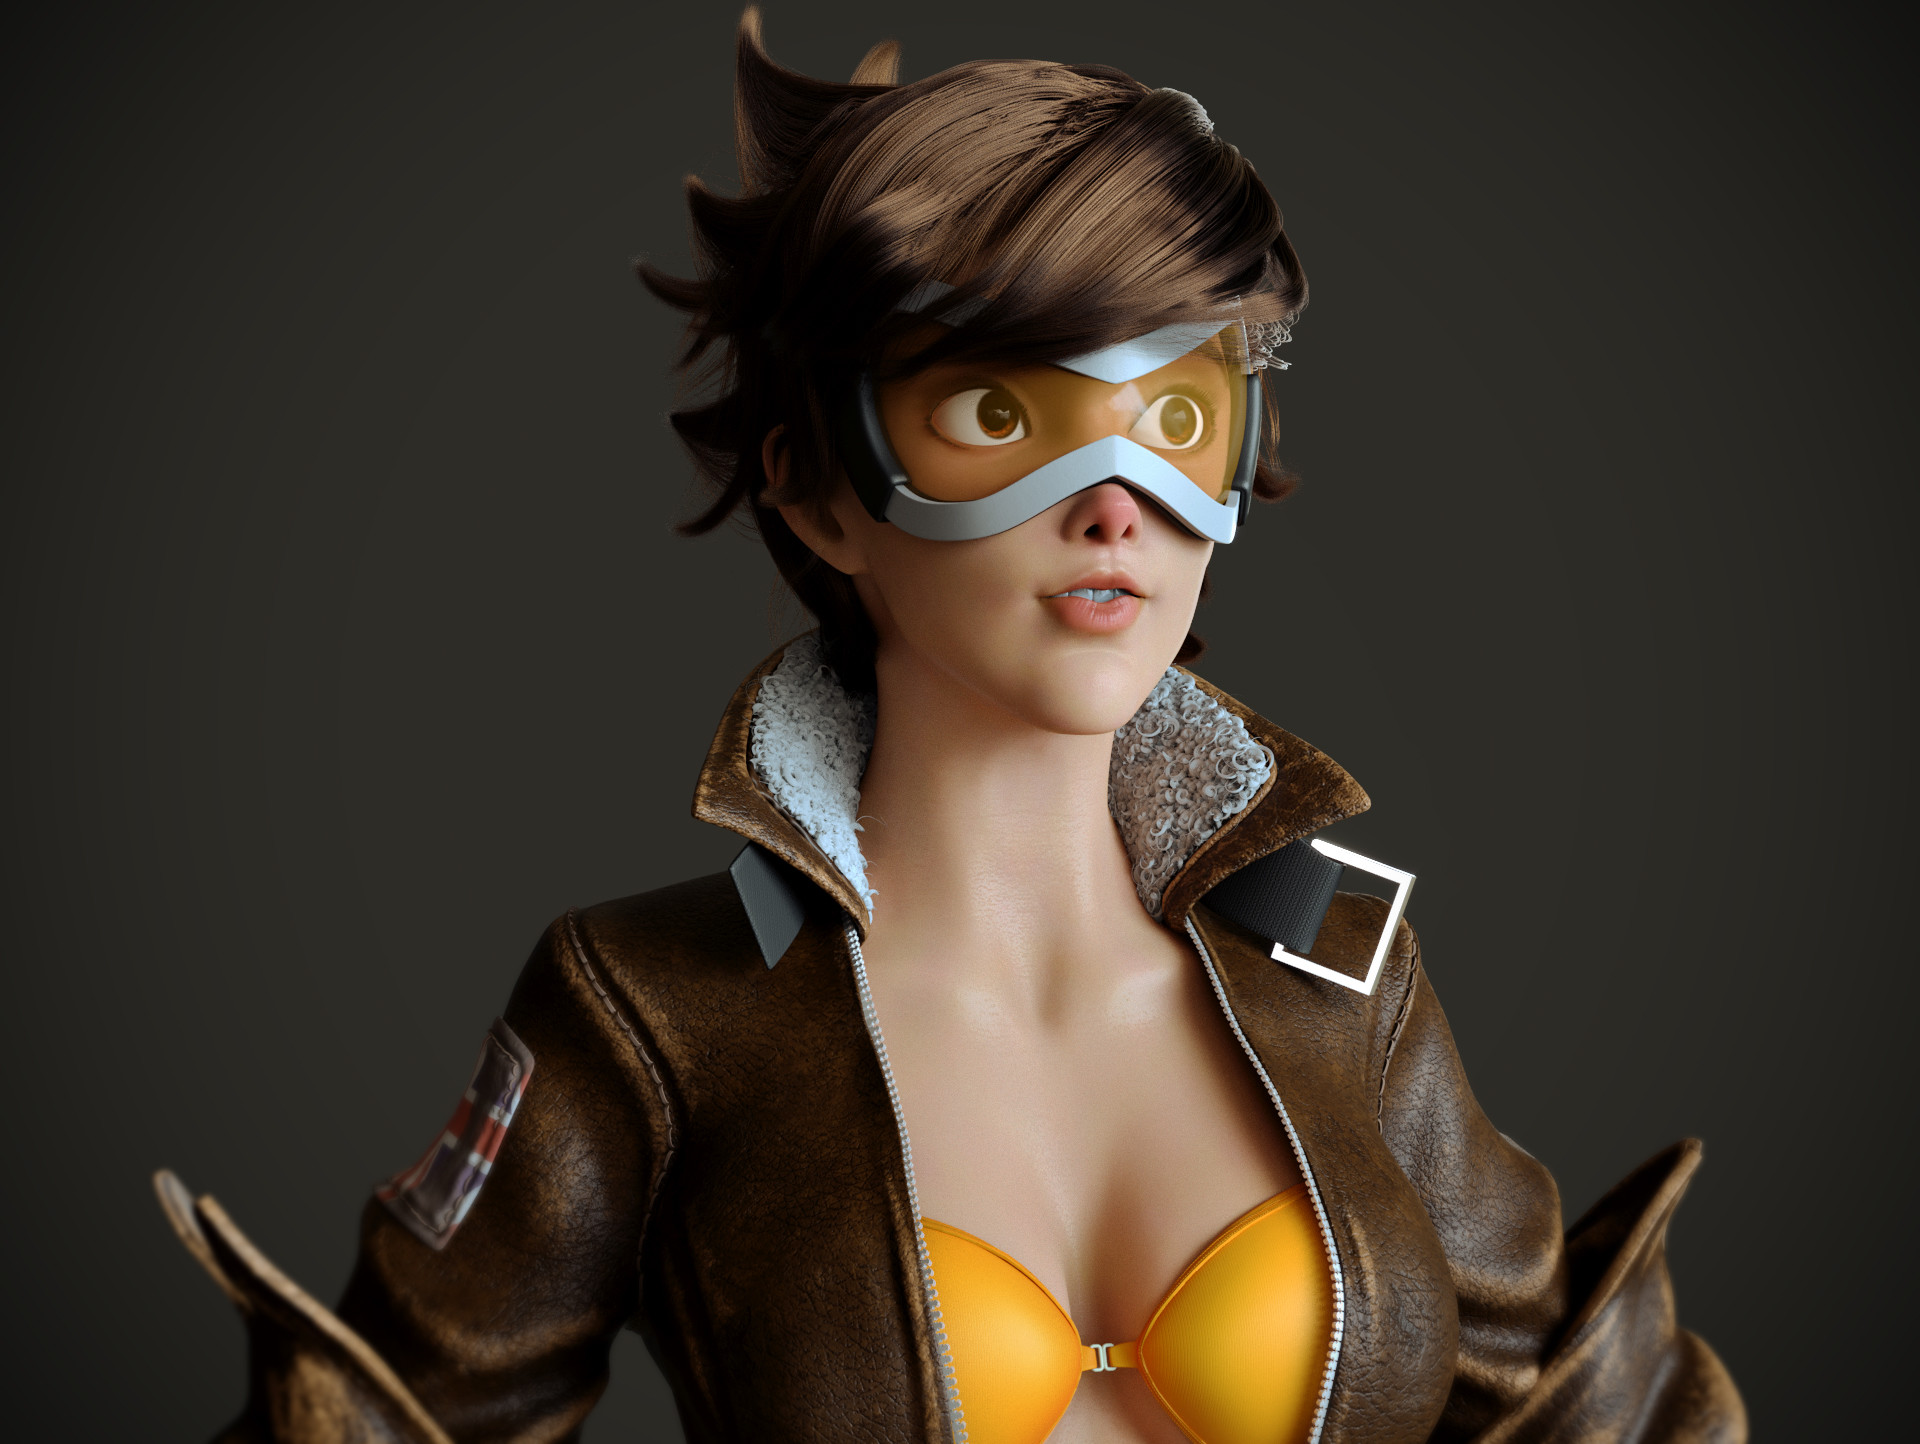 My latest fan art for Tracer : r/Overwatch